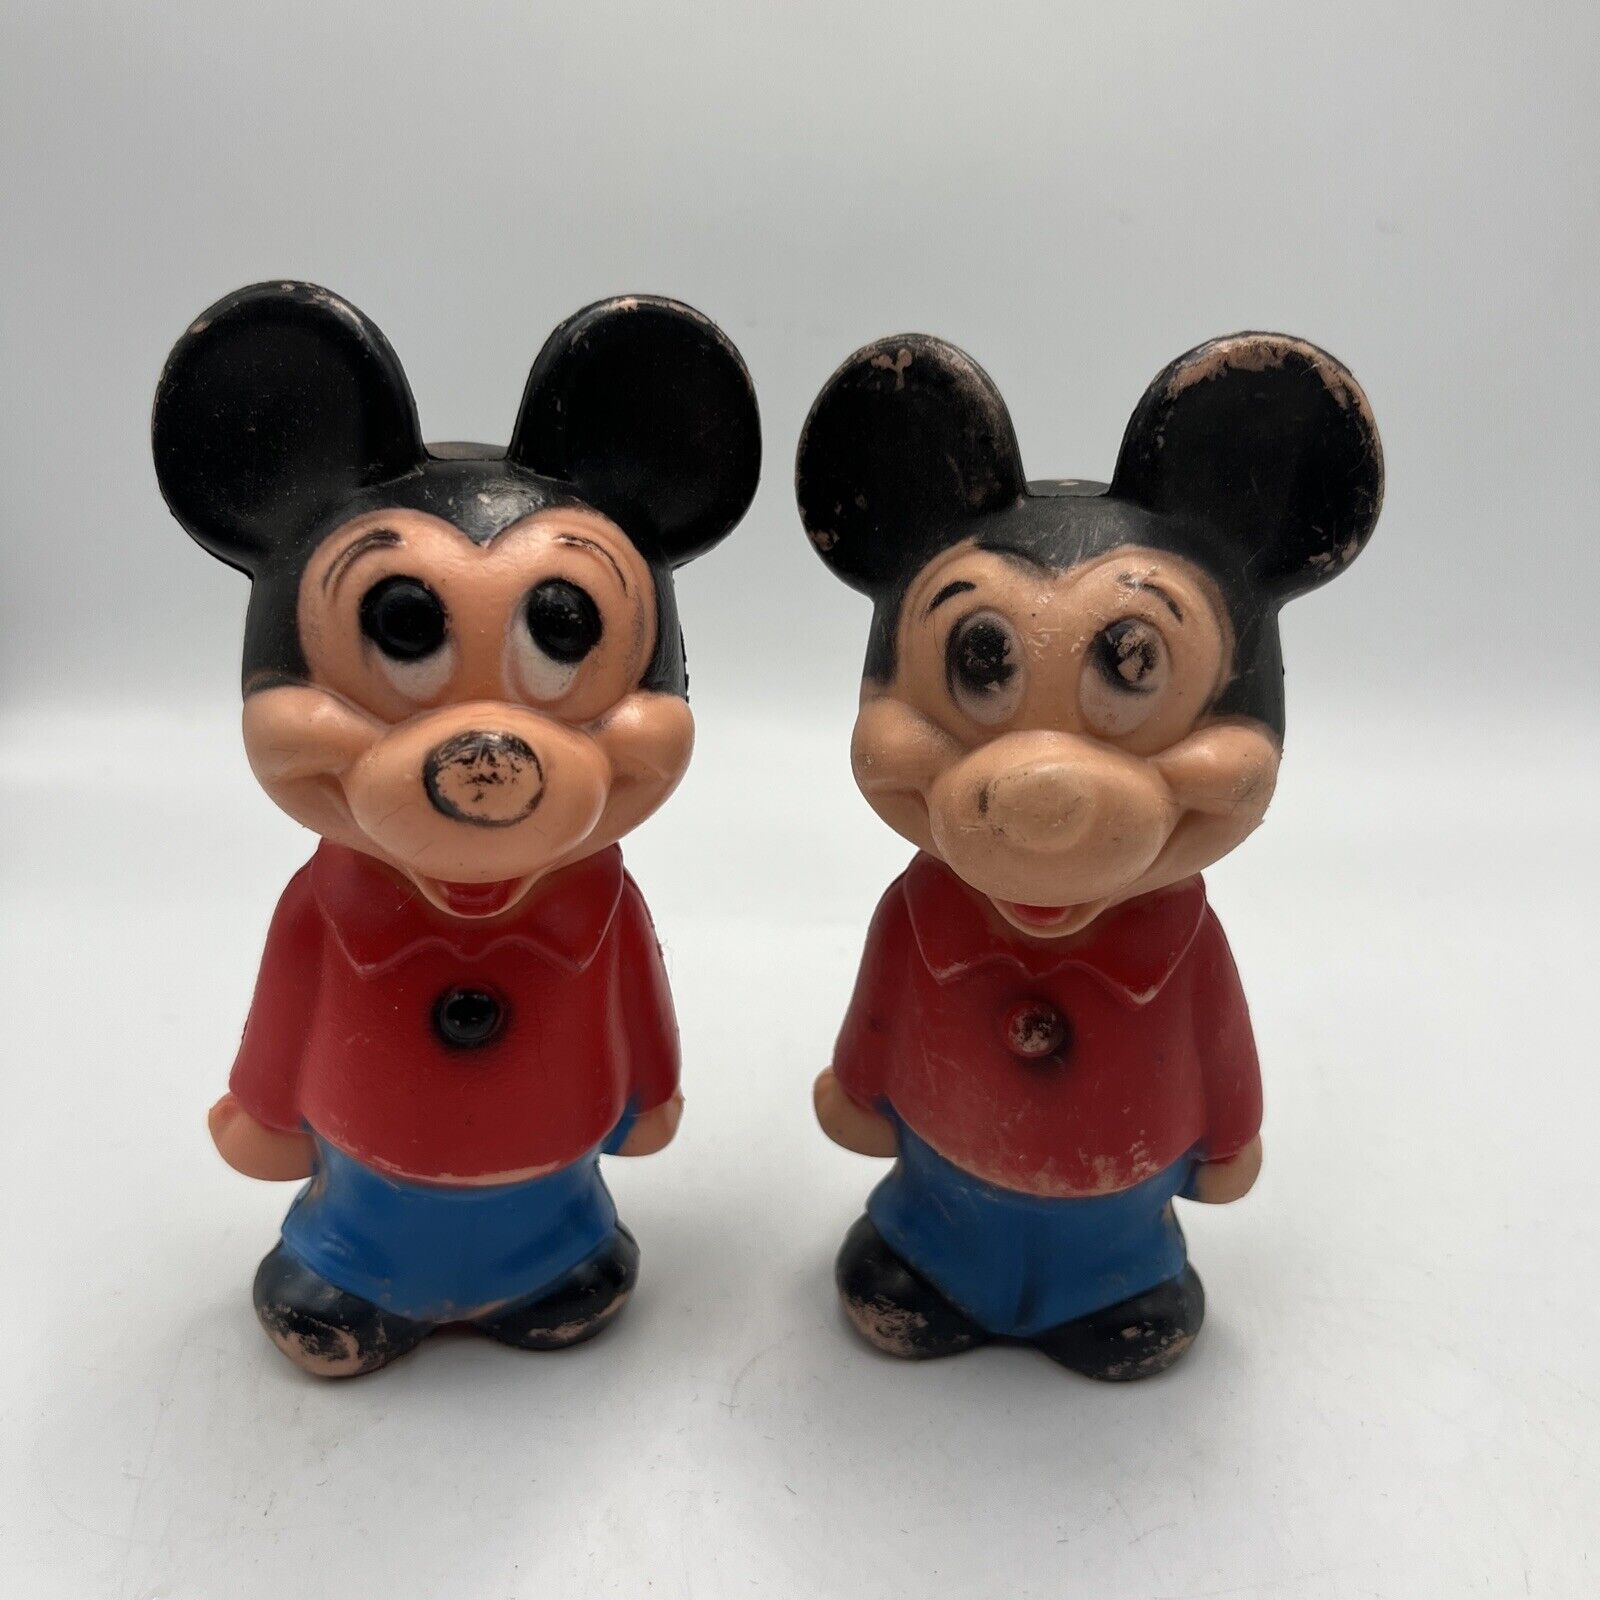 VTG PAIR 1950s Walt Disney Productions Mickey Mouse Rubber Toy Figure Hong Kong